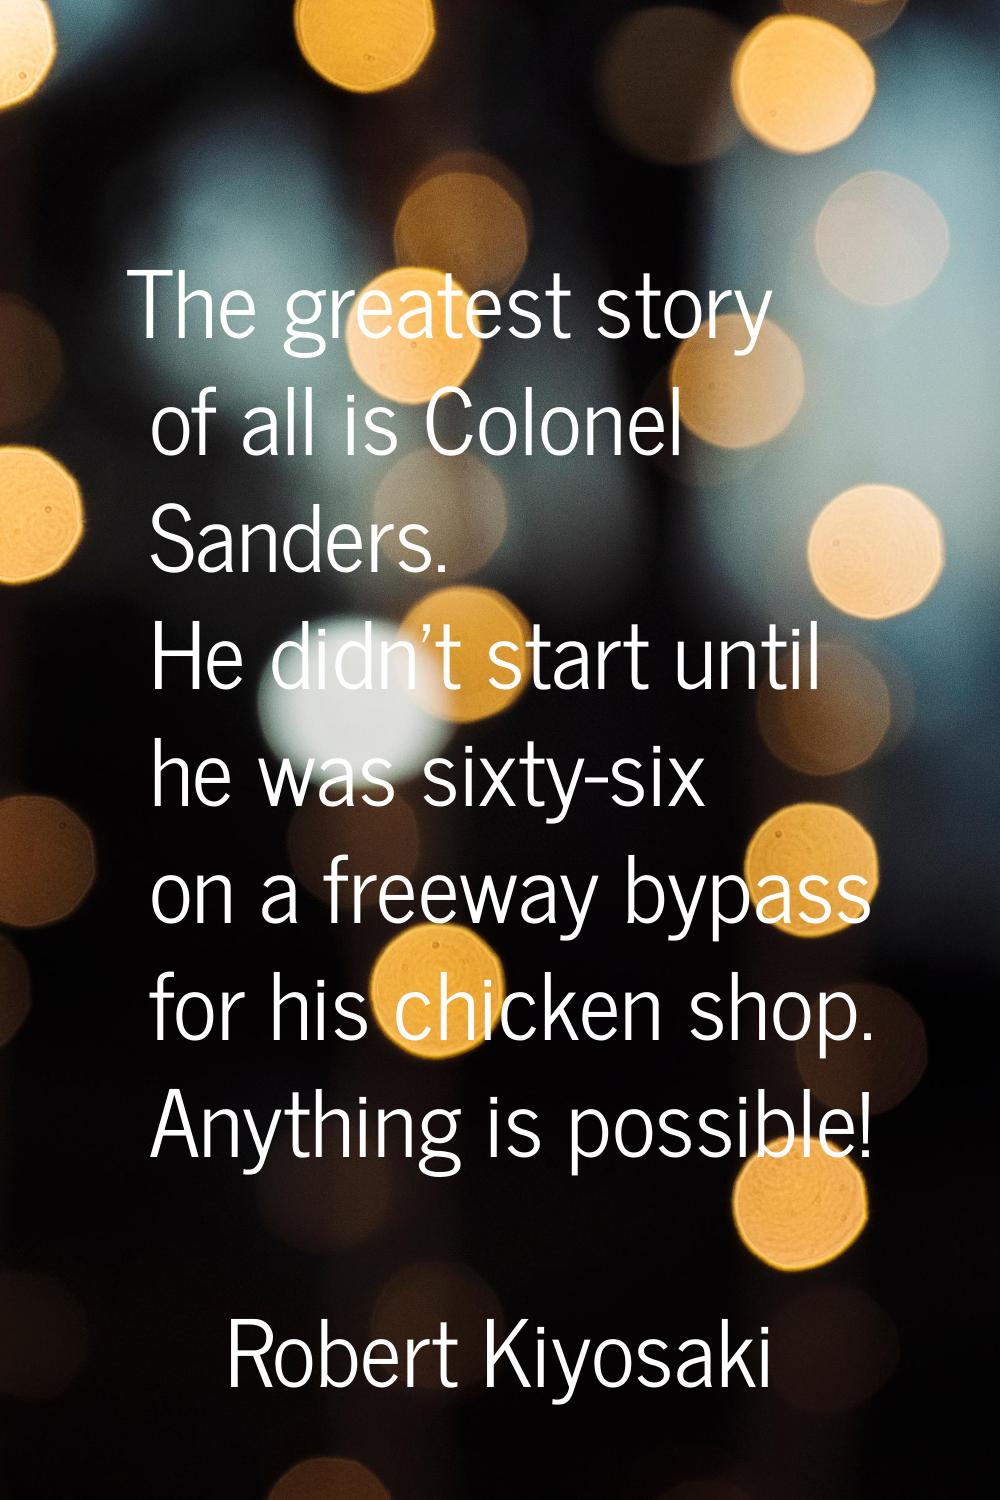 The greatest story of all is Colonel Sanders. He didn't start until he was sixty-six on a freeway b